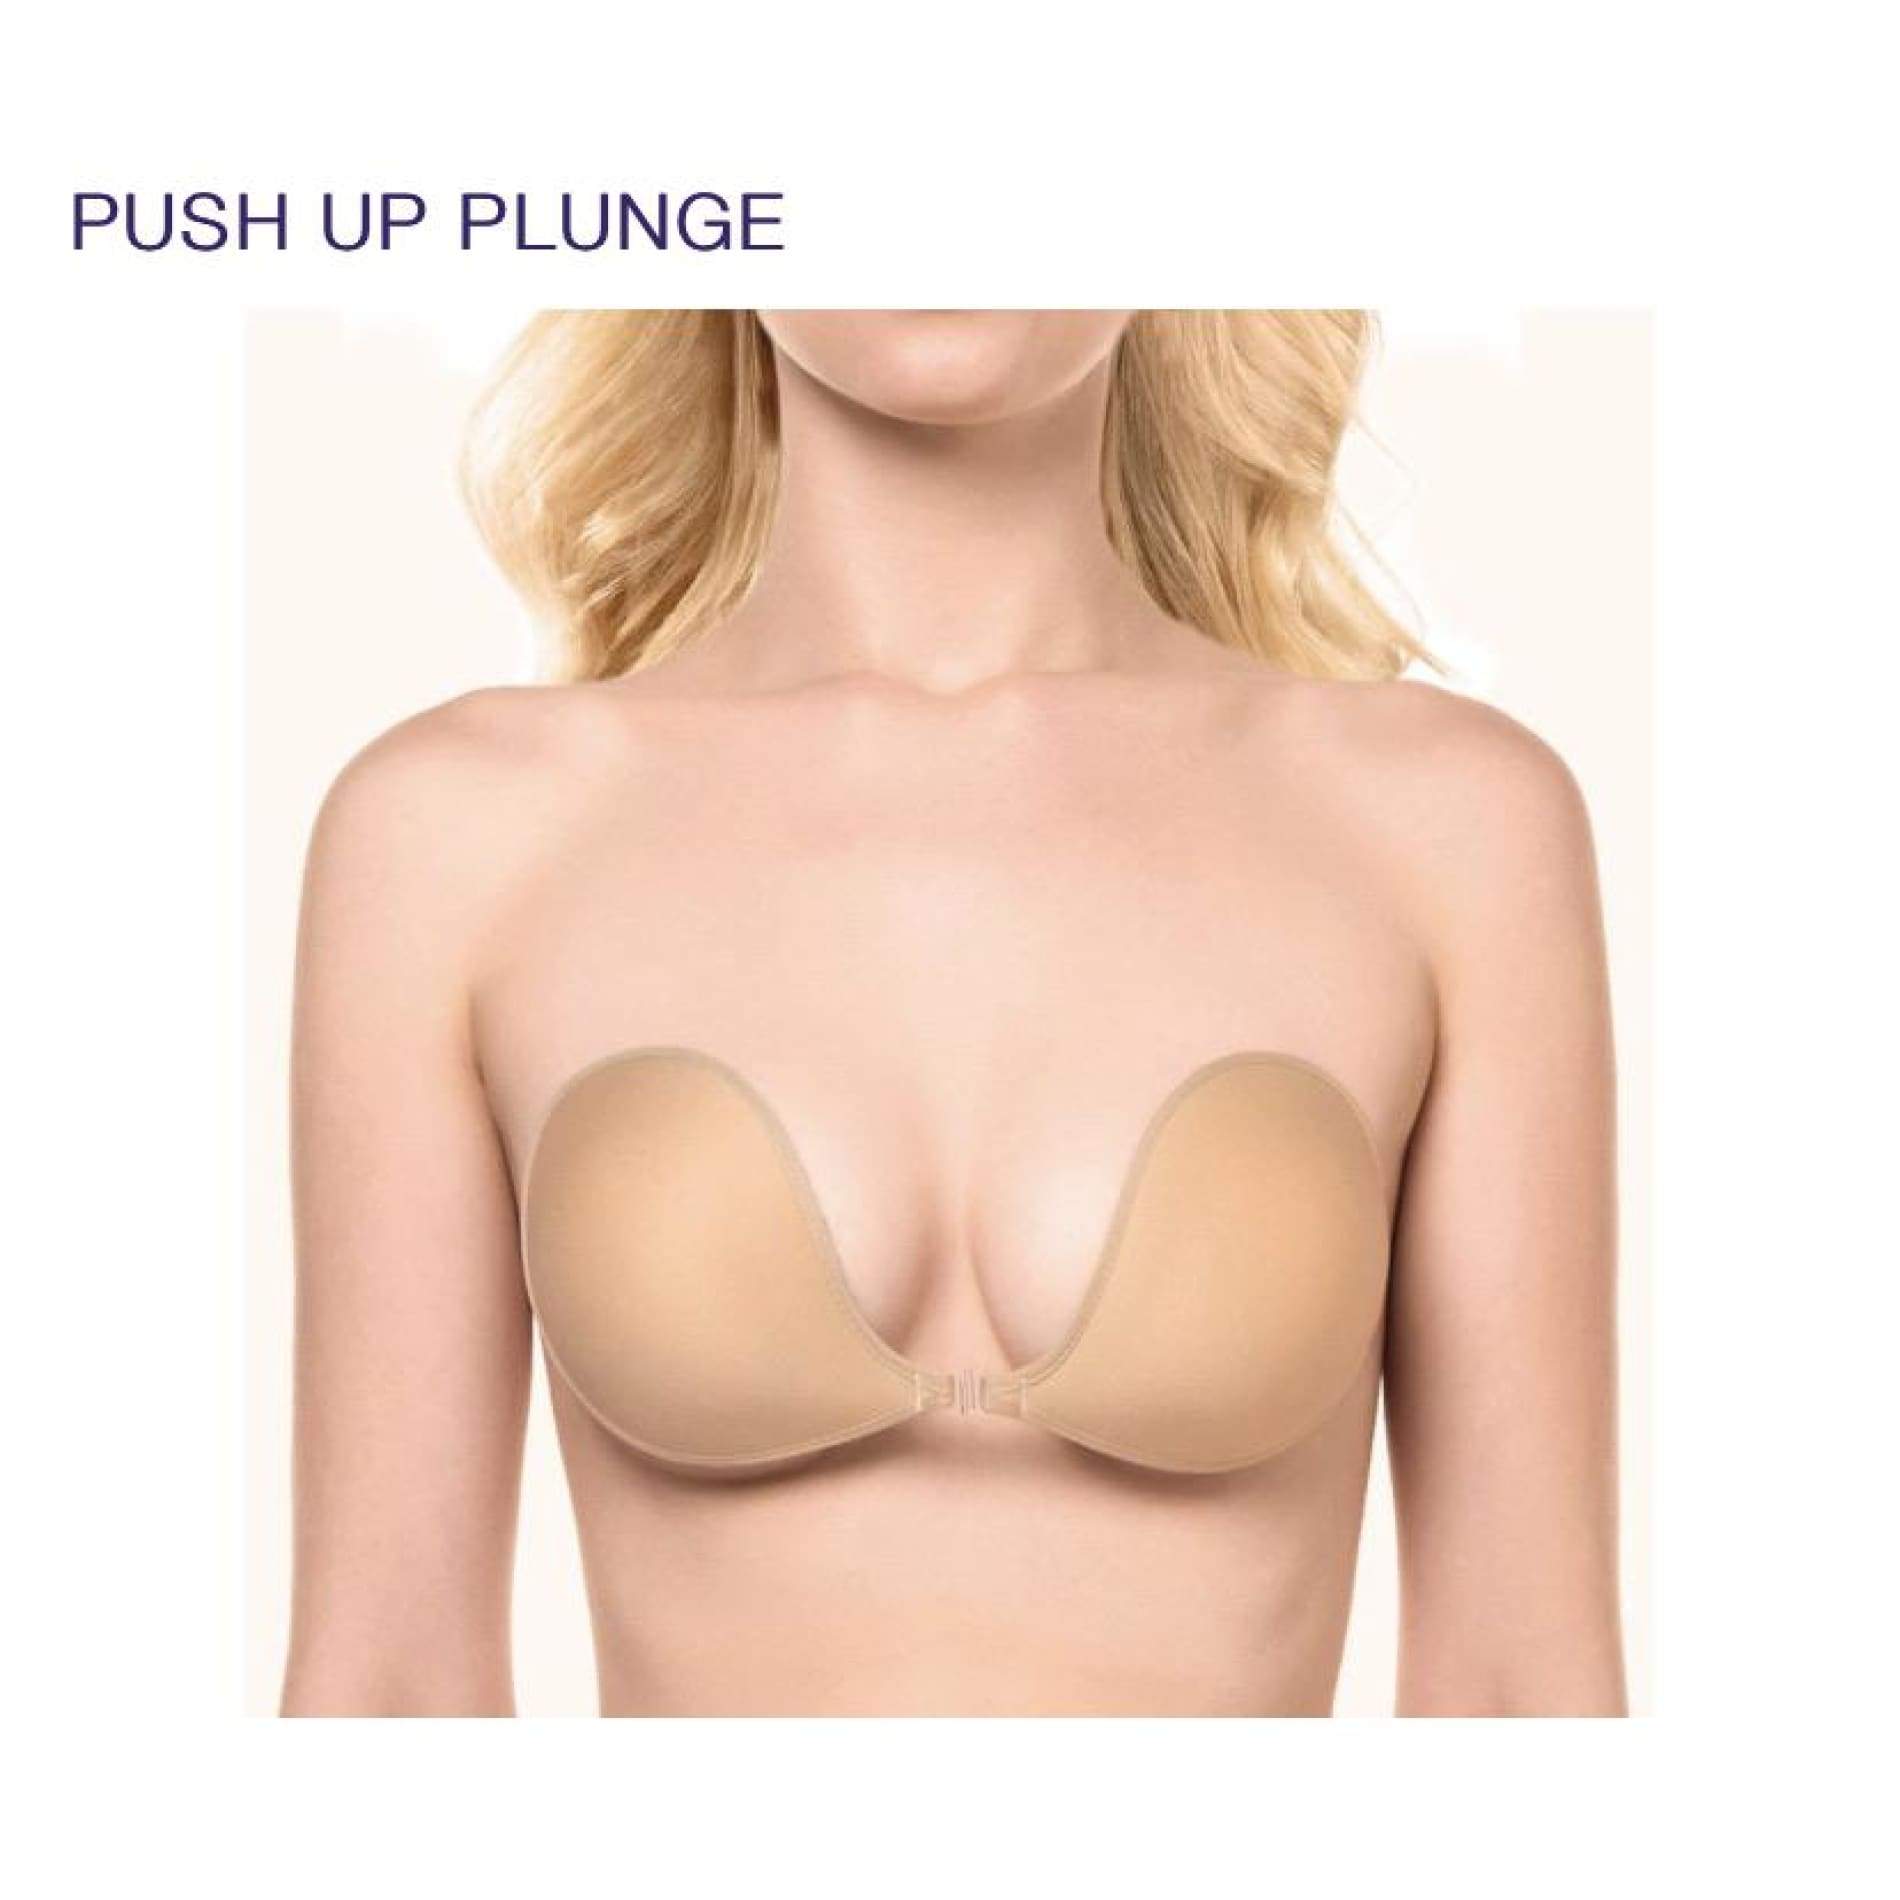 http://shoppolished.com/cdn/shop/products/nubra-push-up-plunge-accessories-adhesive-backless-bra-fair-nude-pushup-sticky-boobs-tan-210-other-polished-boutique-brassiere-undergarment-clothing-969.jpg?v=1643048222